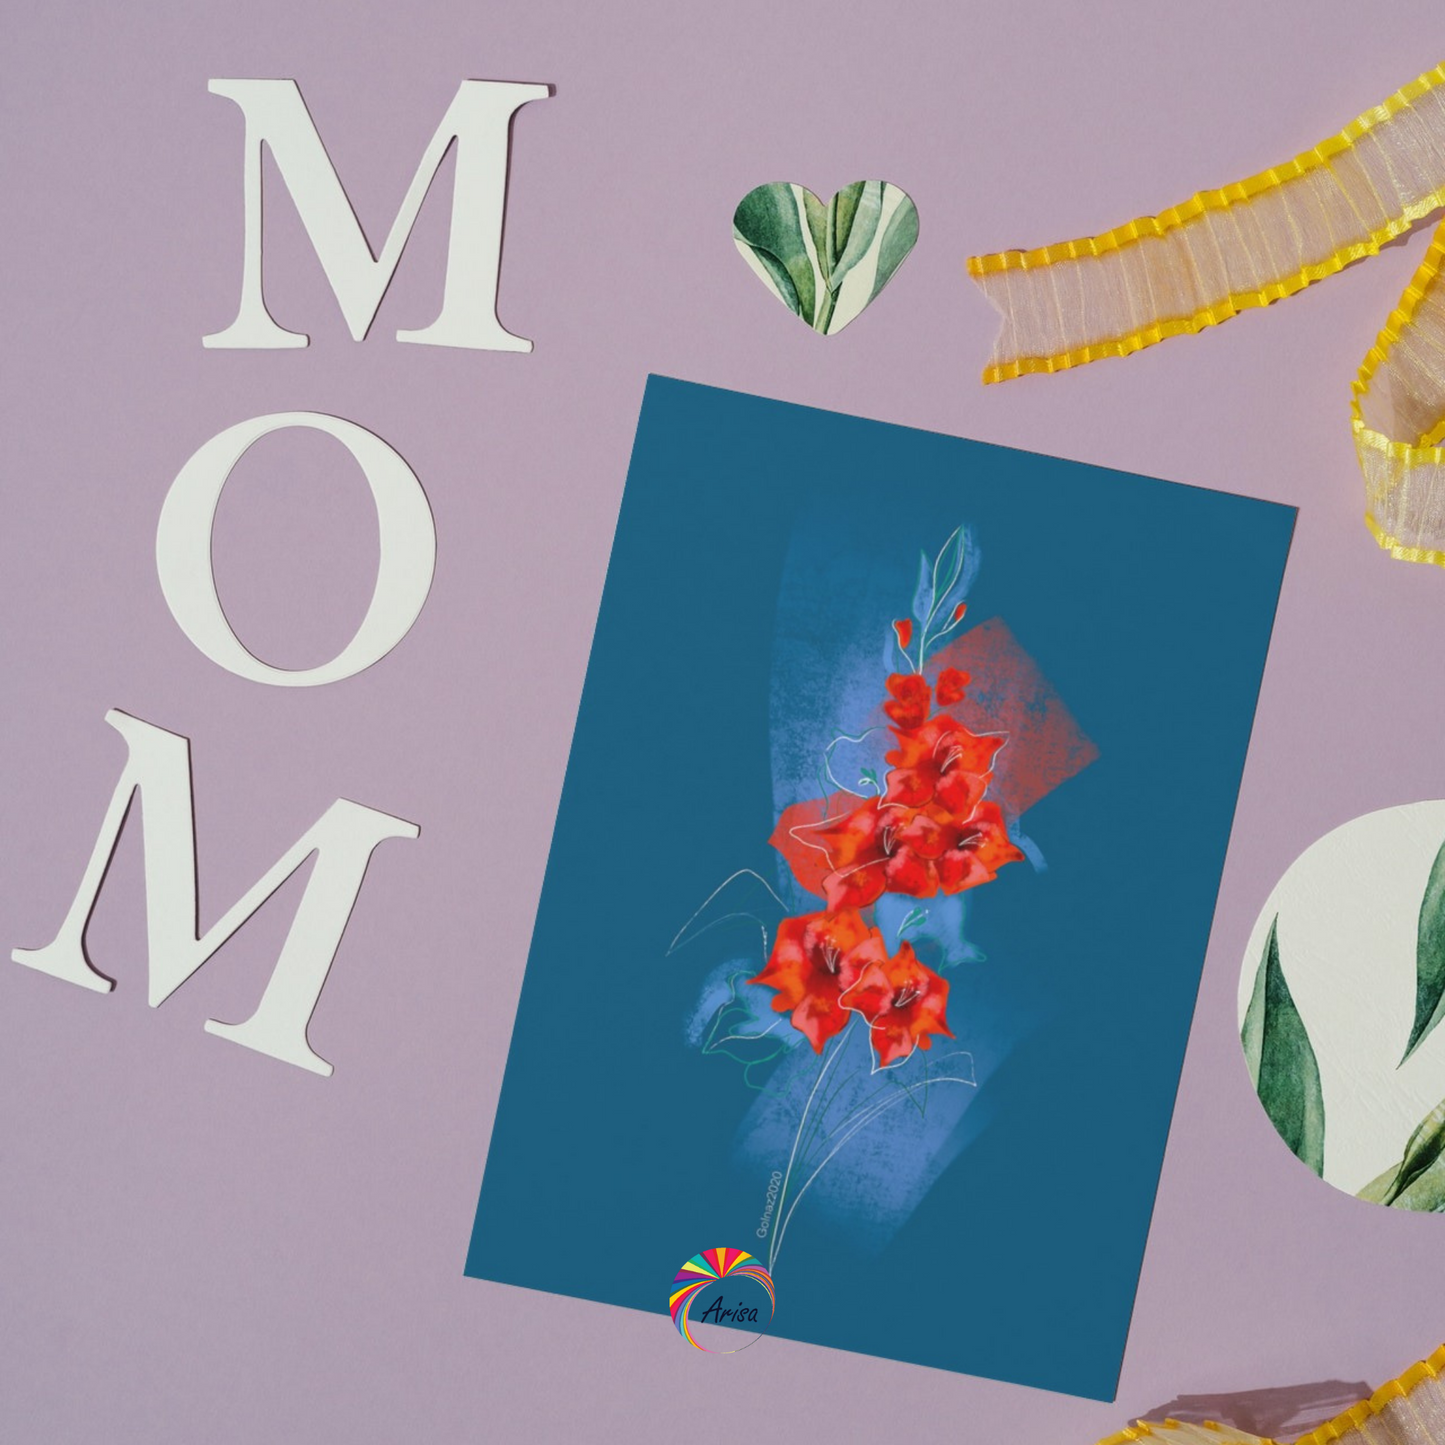 "Gladiolus" Greeting Card by ArisaTeam ideal as a Mother's Day card.